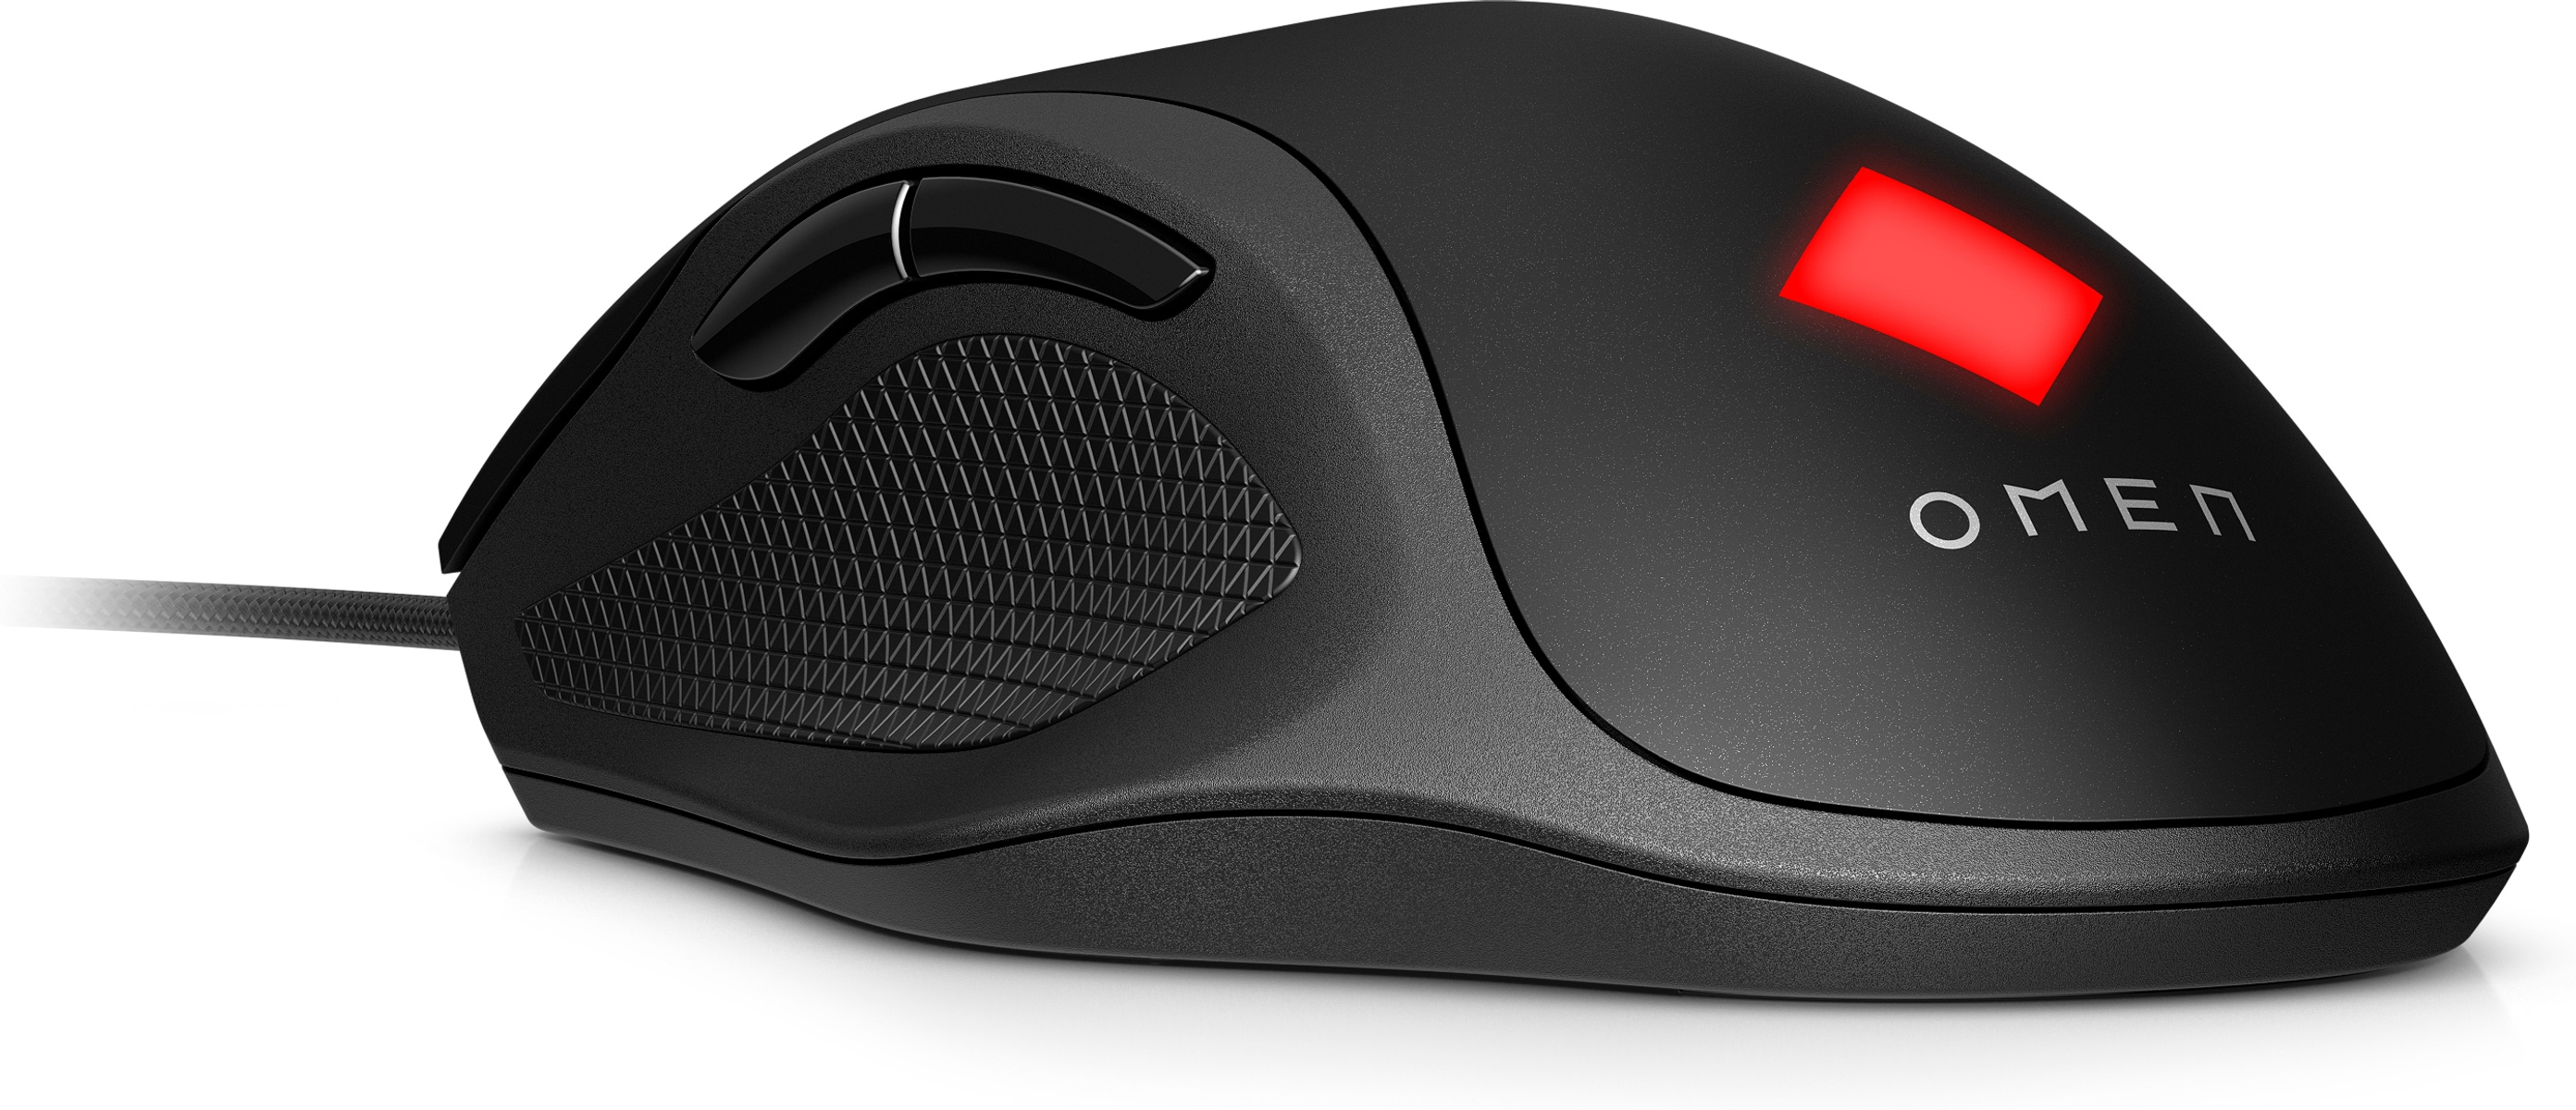 Schwarz GAMING OMEN MOUSE Gaming-Maus, VECTOR 8BC53AA HP